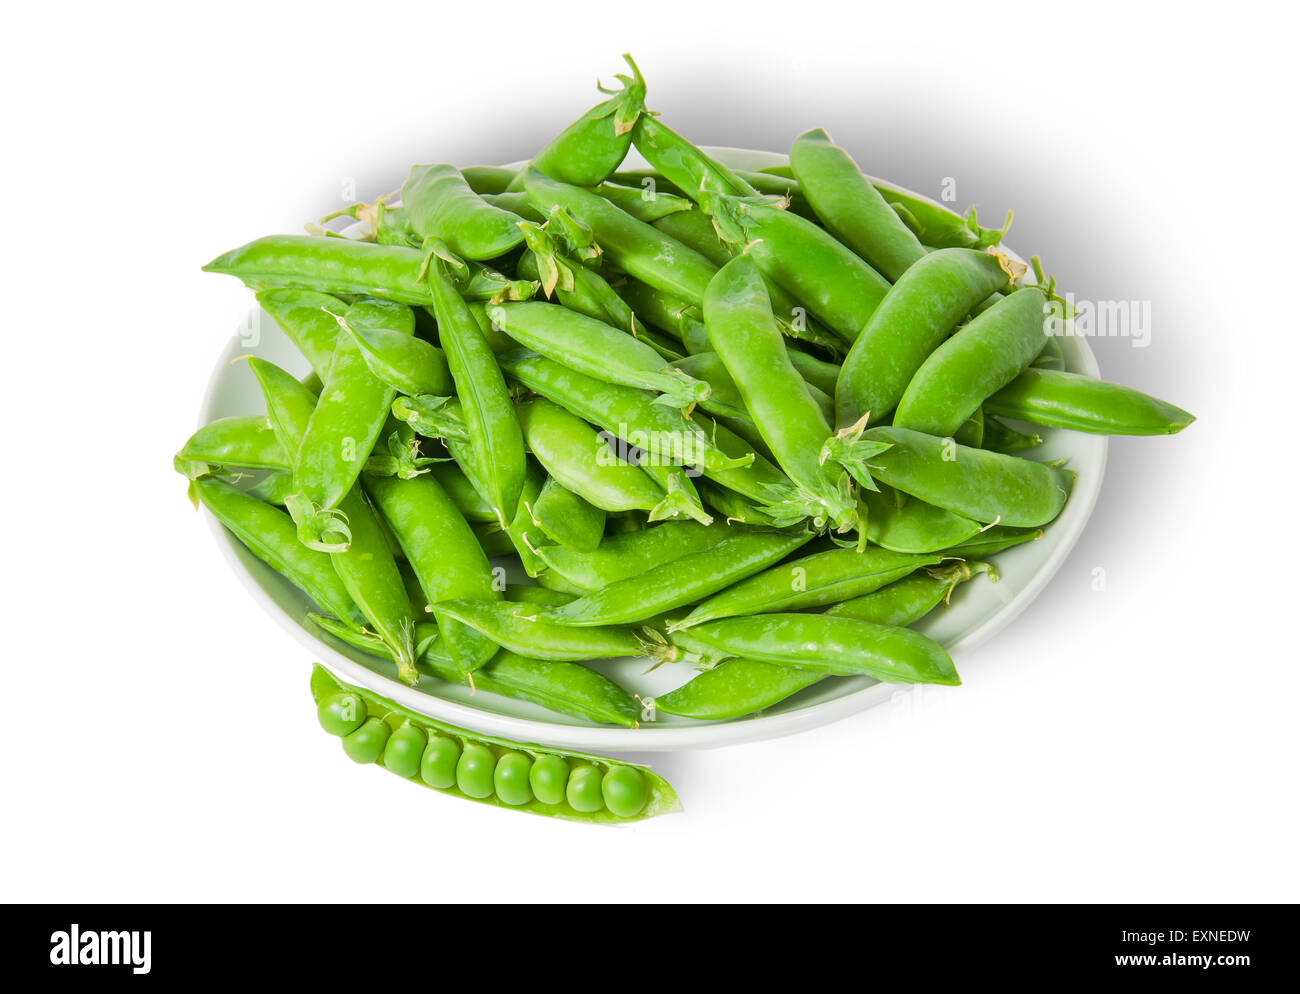 Opening and closing pea pods on white plate top view isolated on white background Stock Photo